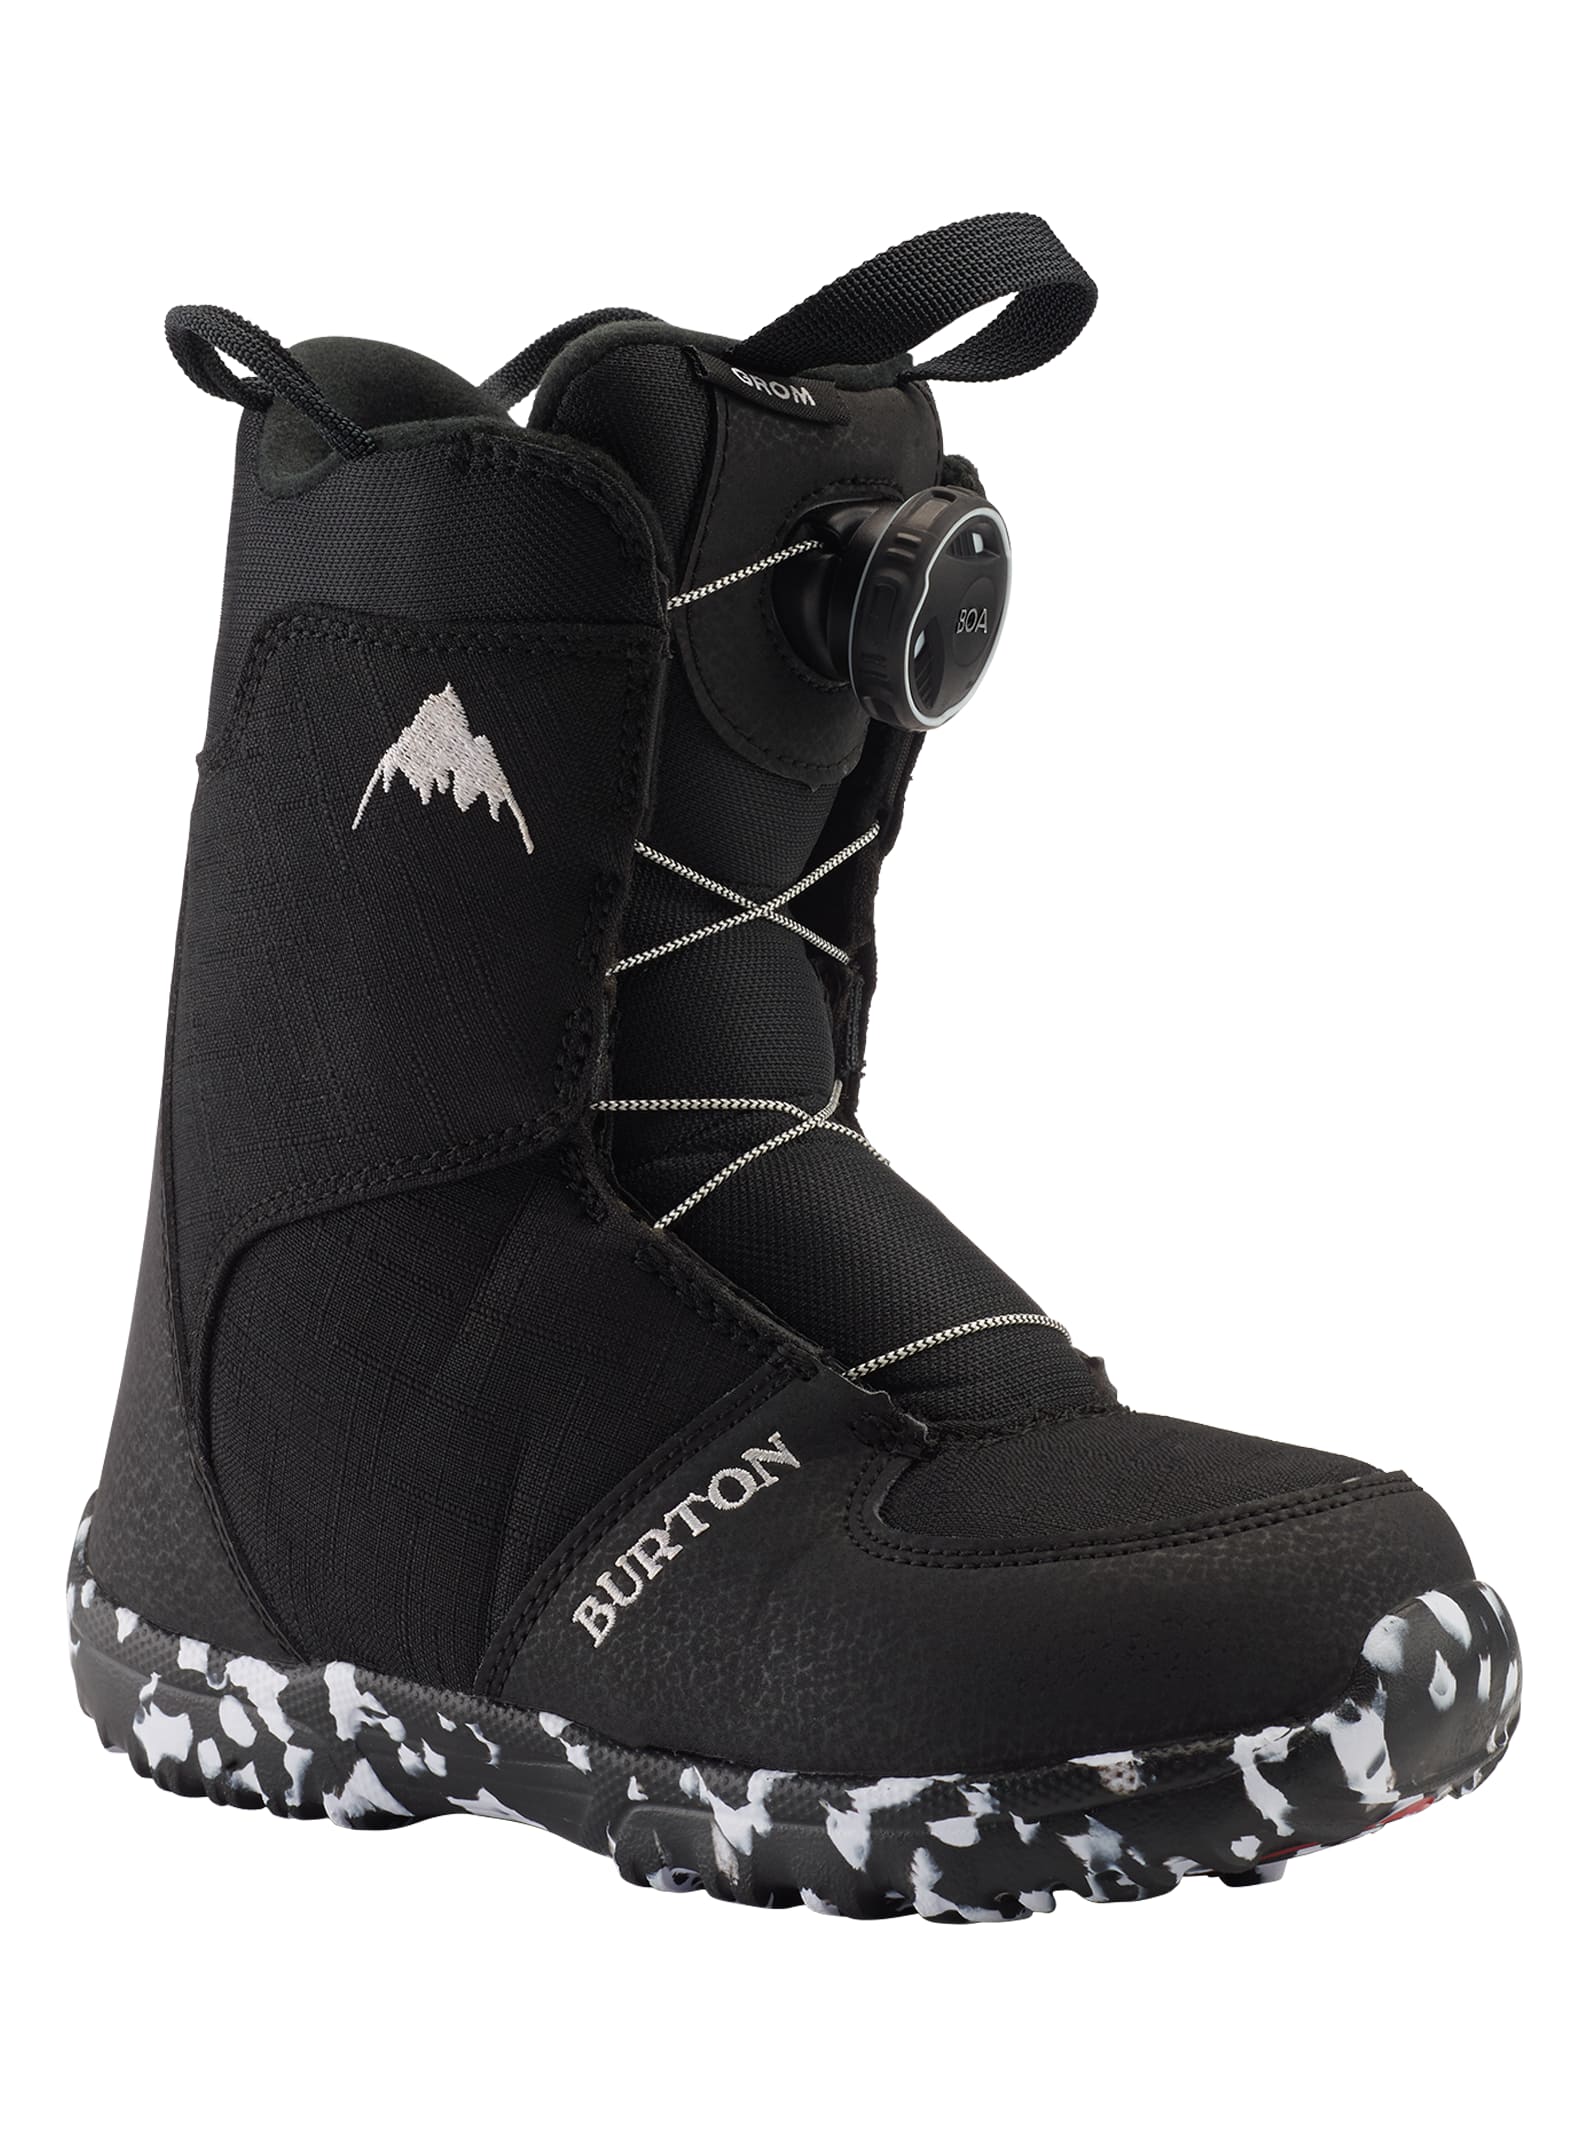 K2 Mini Turbo Snowboard BOOTS Boys Size 13c Black Youth 2020 for sale online 